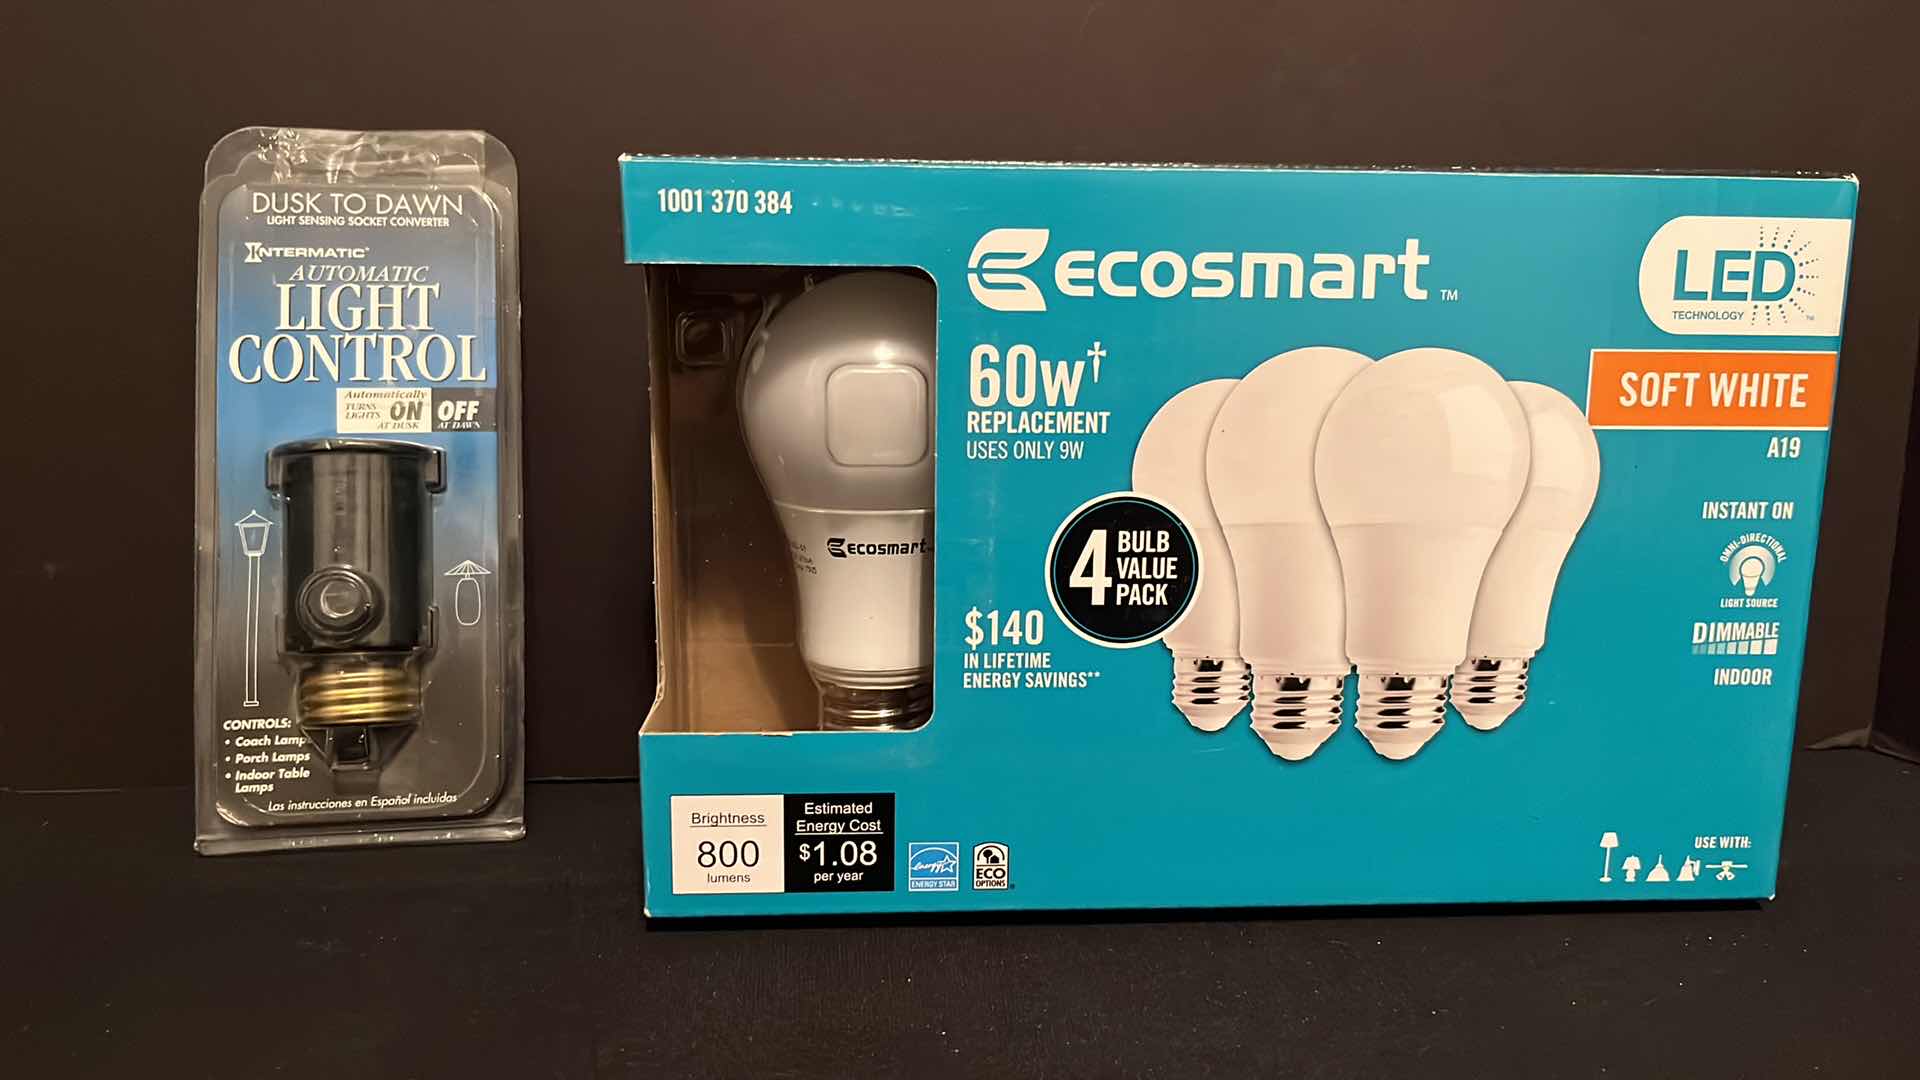 Photo 1 of NIB ECOSMART 4-PACK 60W A19 DIMMABLE ENERGY STAR LED LIGHT BULB SOFT WHITE & INTERMATIC AUTOMATIC LIGHT CONTROL DUSK TO DAWN LIGHT SENSING SOCKET CONVERTER, INDOOR/OUTDOOR 150W AT 120 VAC (MODEL NE1C)